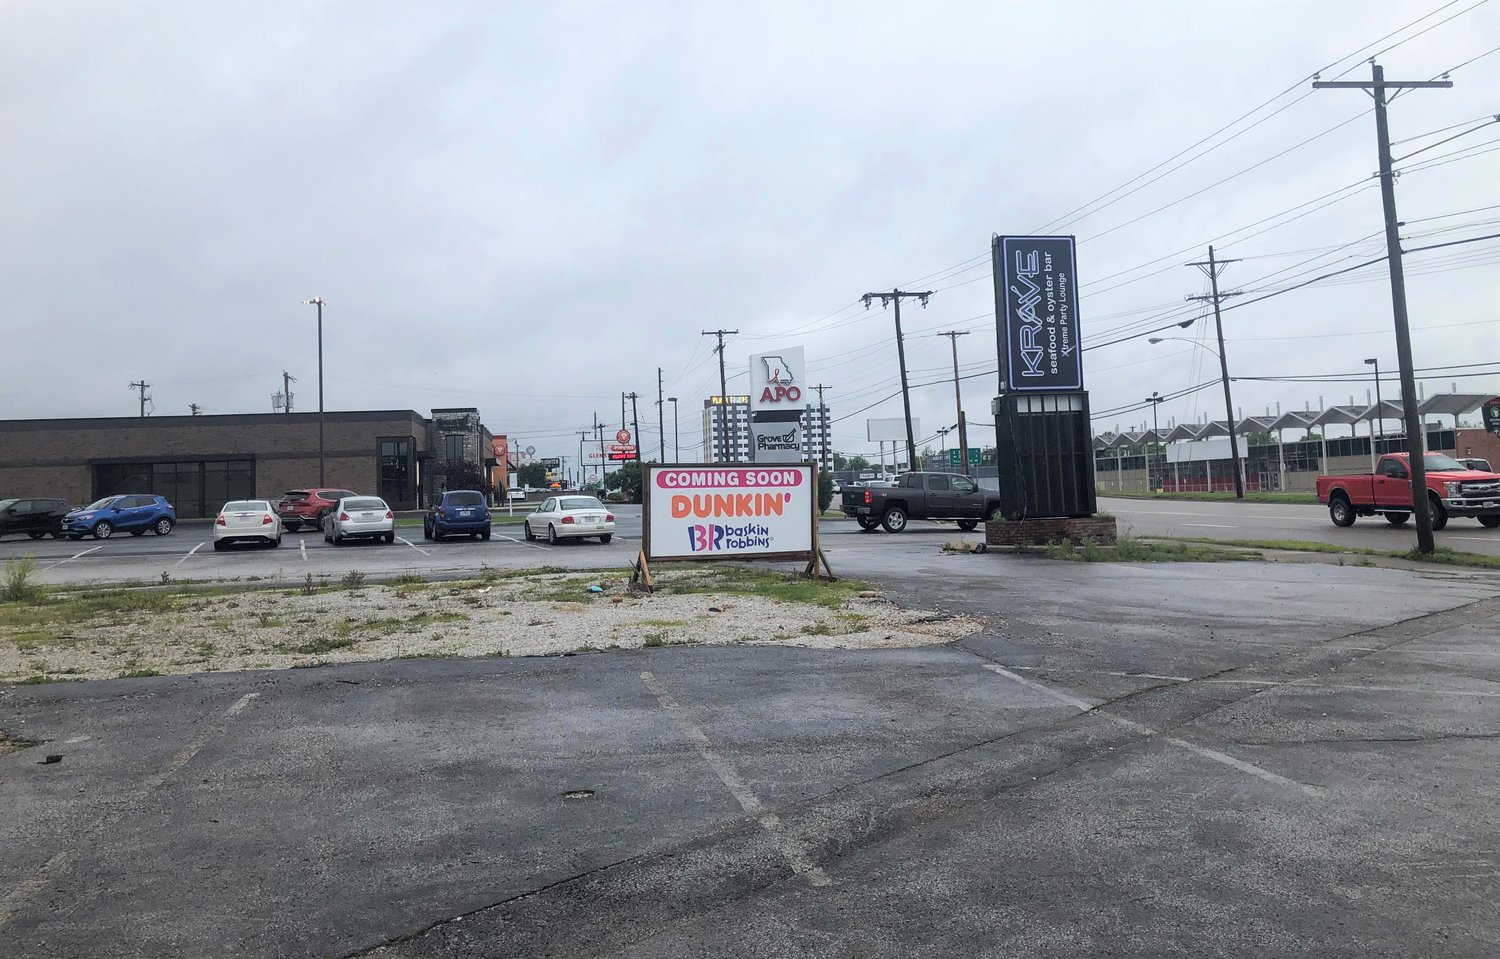 The total project cost is $2 million for a planned Dunkin’/Baskin-Robbins combination restaurant at the former site of Krave Seafood & Oyster Bar.